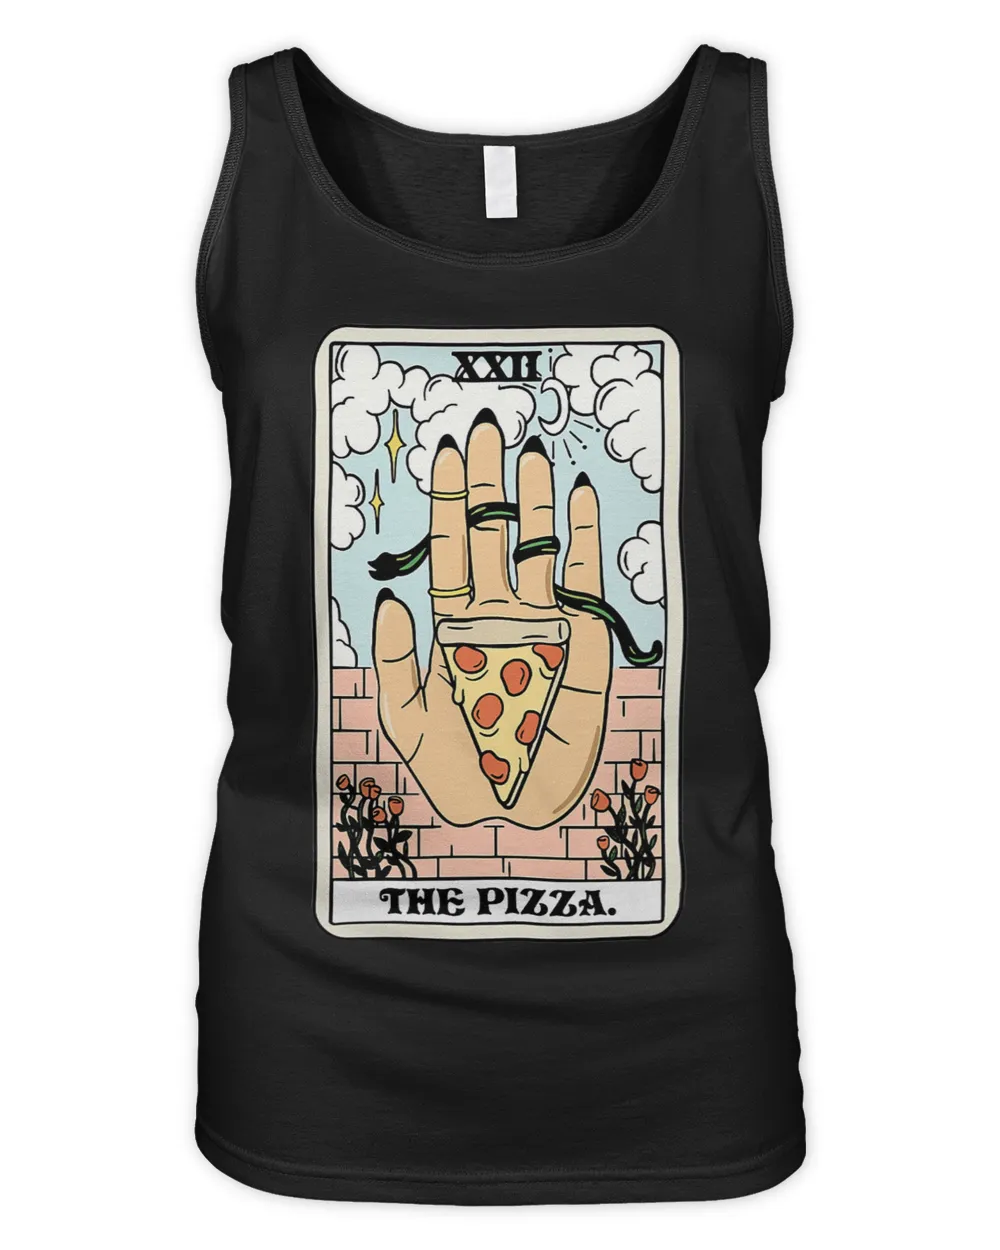 The Pizza Tarot Card Pizza Lover Witchy Hand Holding Pizza